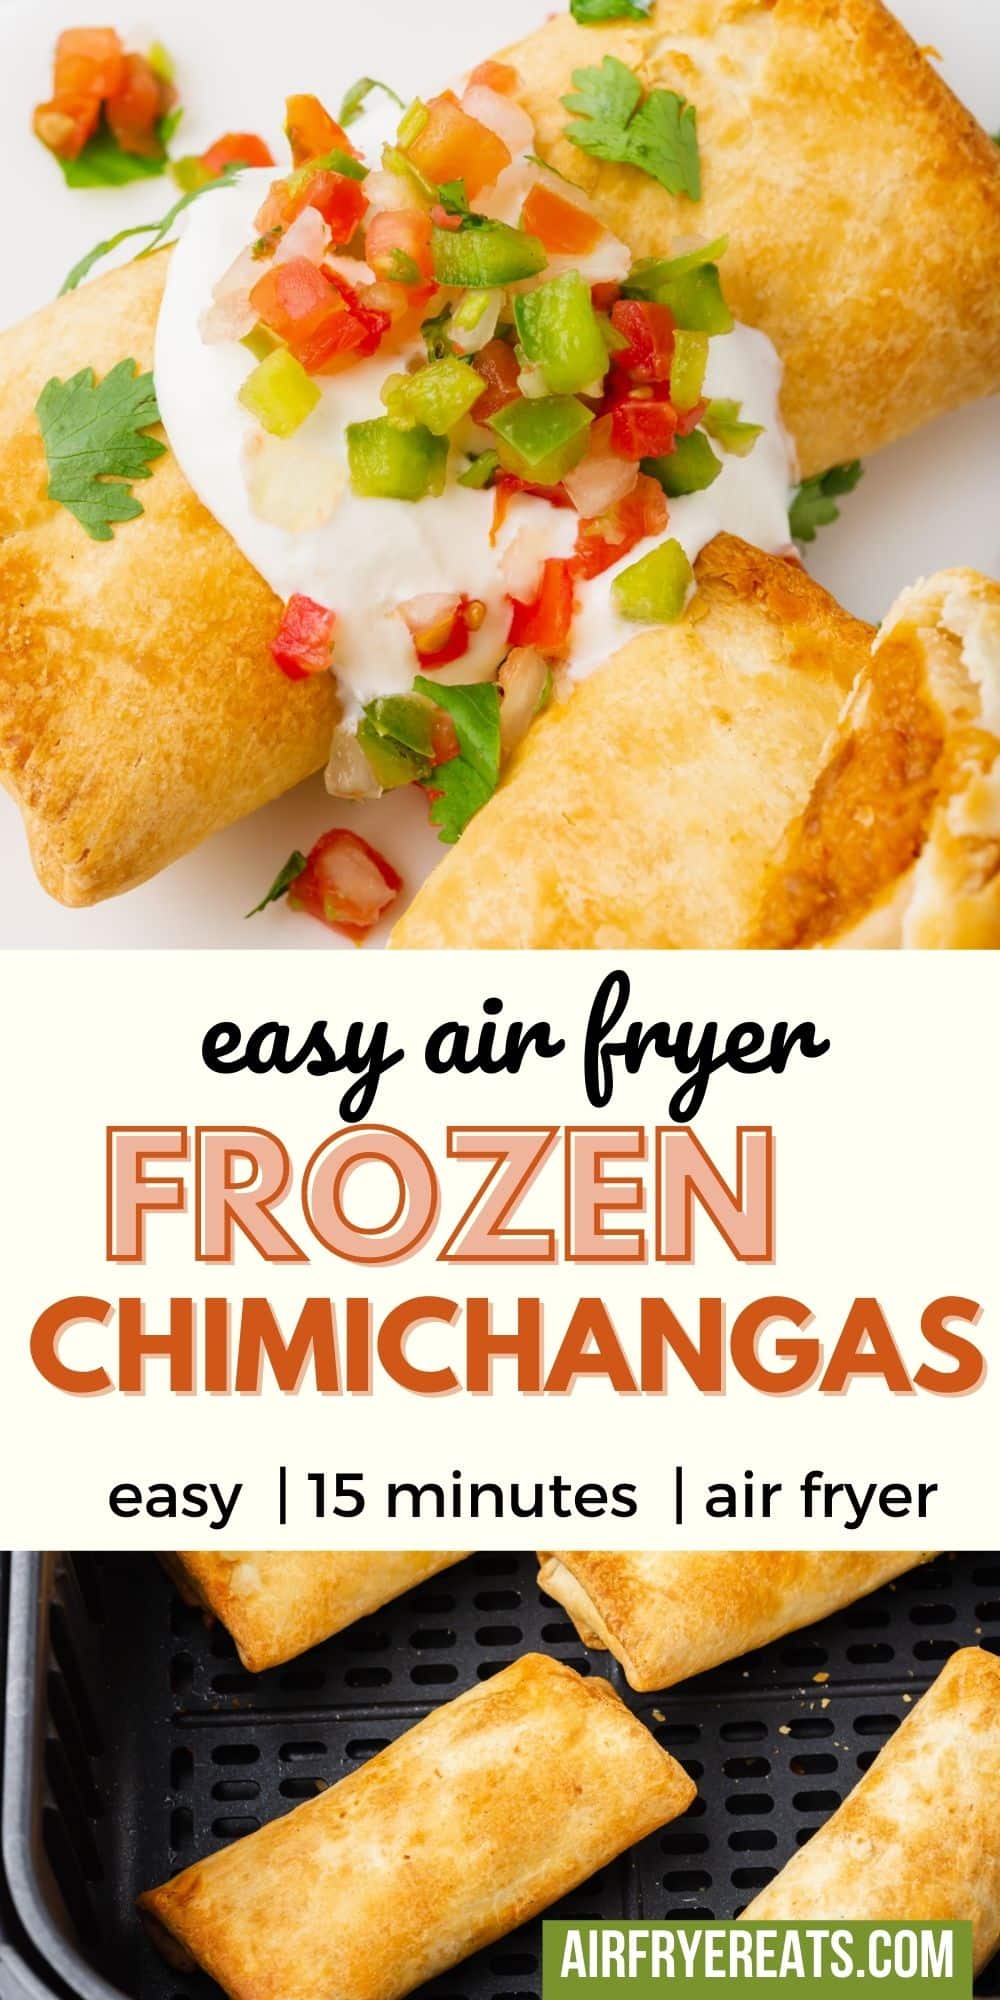 Use your favorite countertop appliance to make an Air Fryer Chimichanga that is hot, crispy, and ready so much quicker than in the oven! via @vegetarianmamma